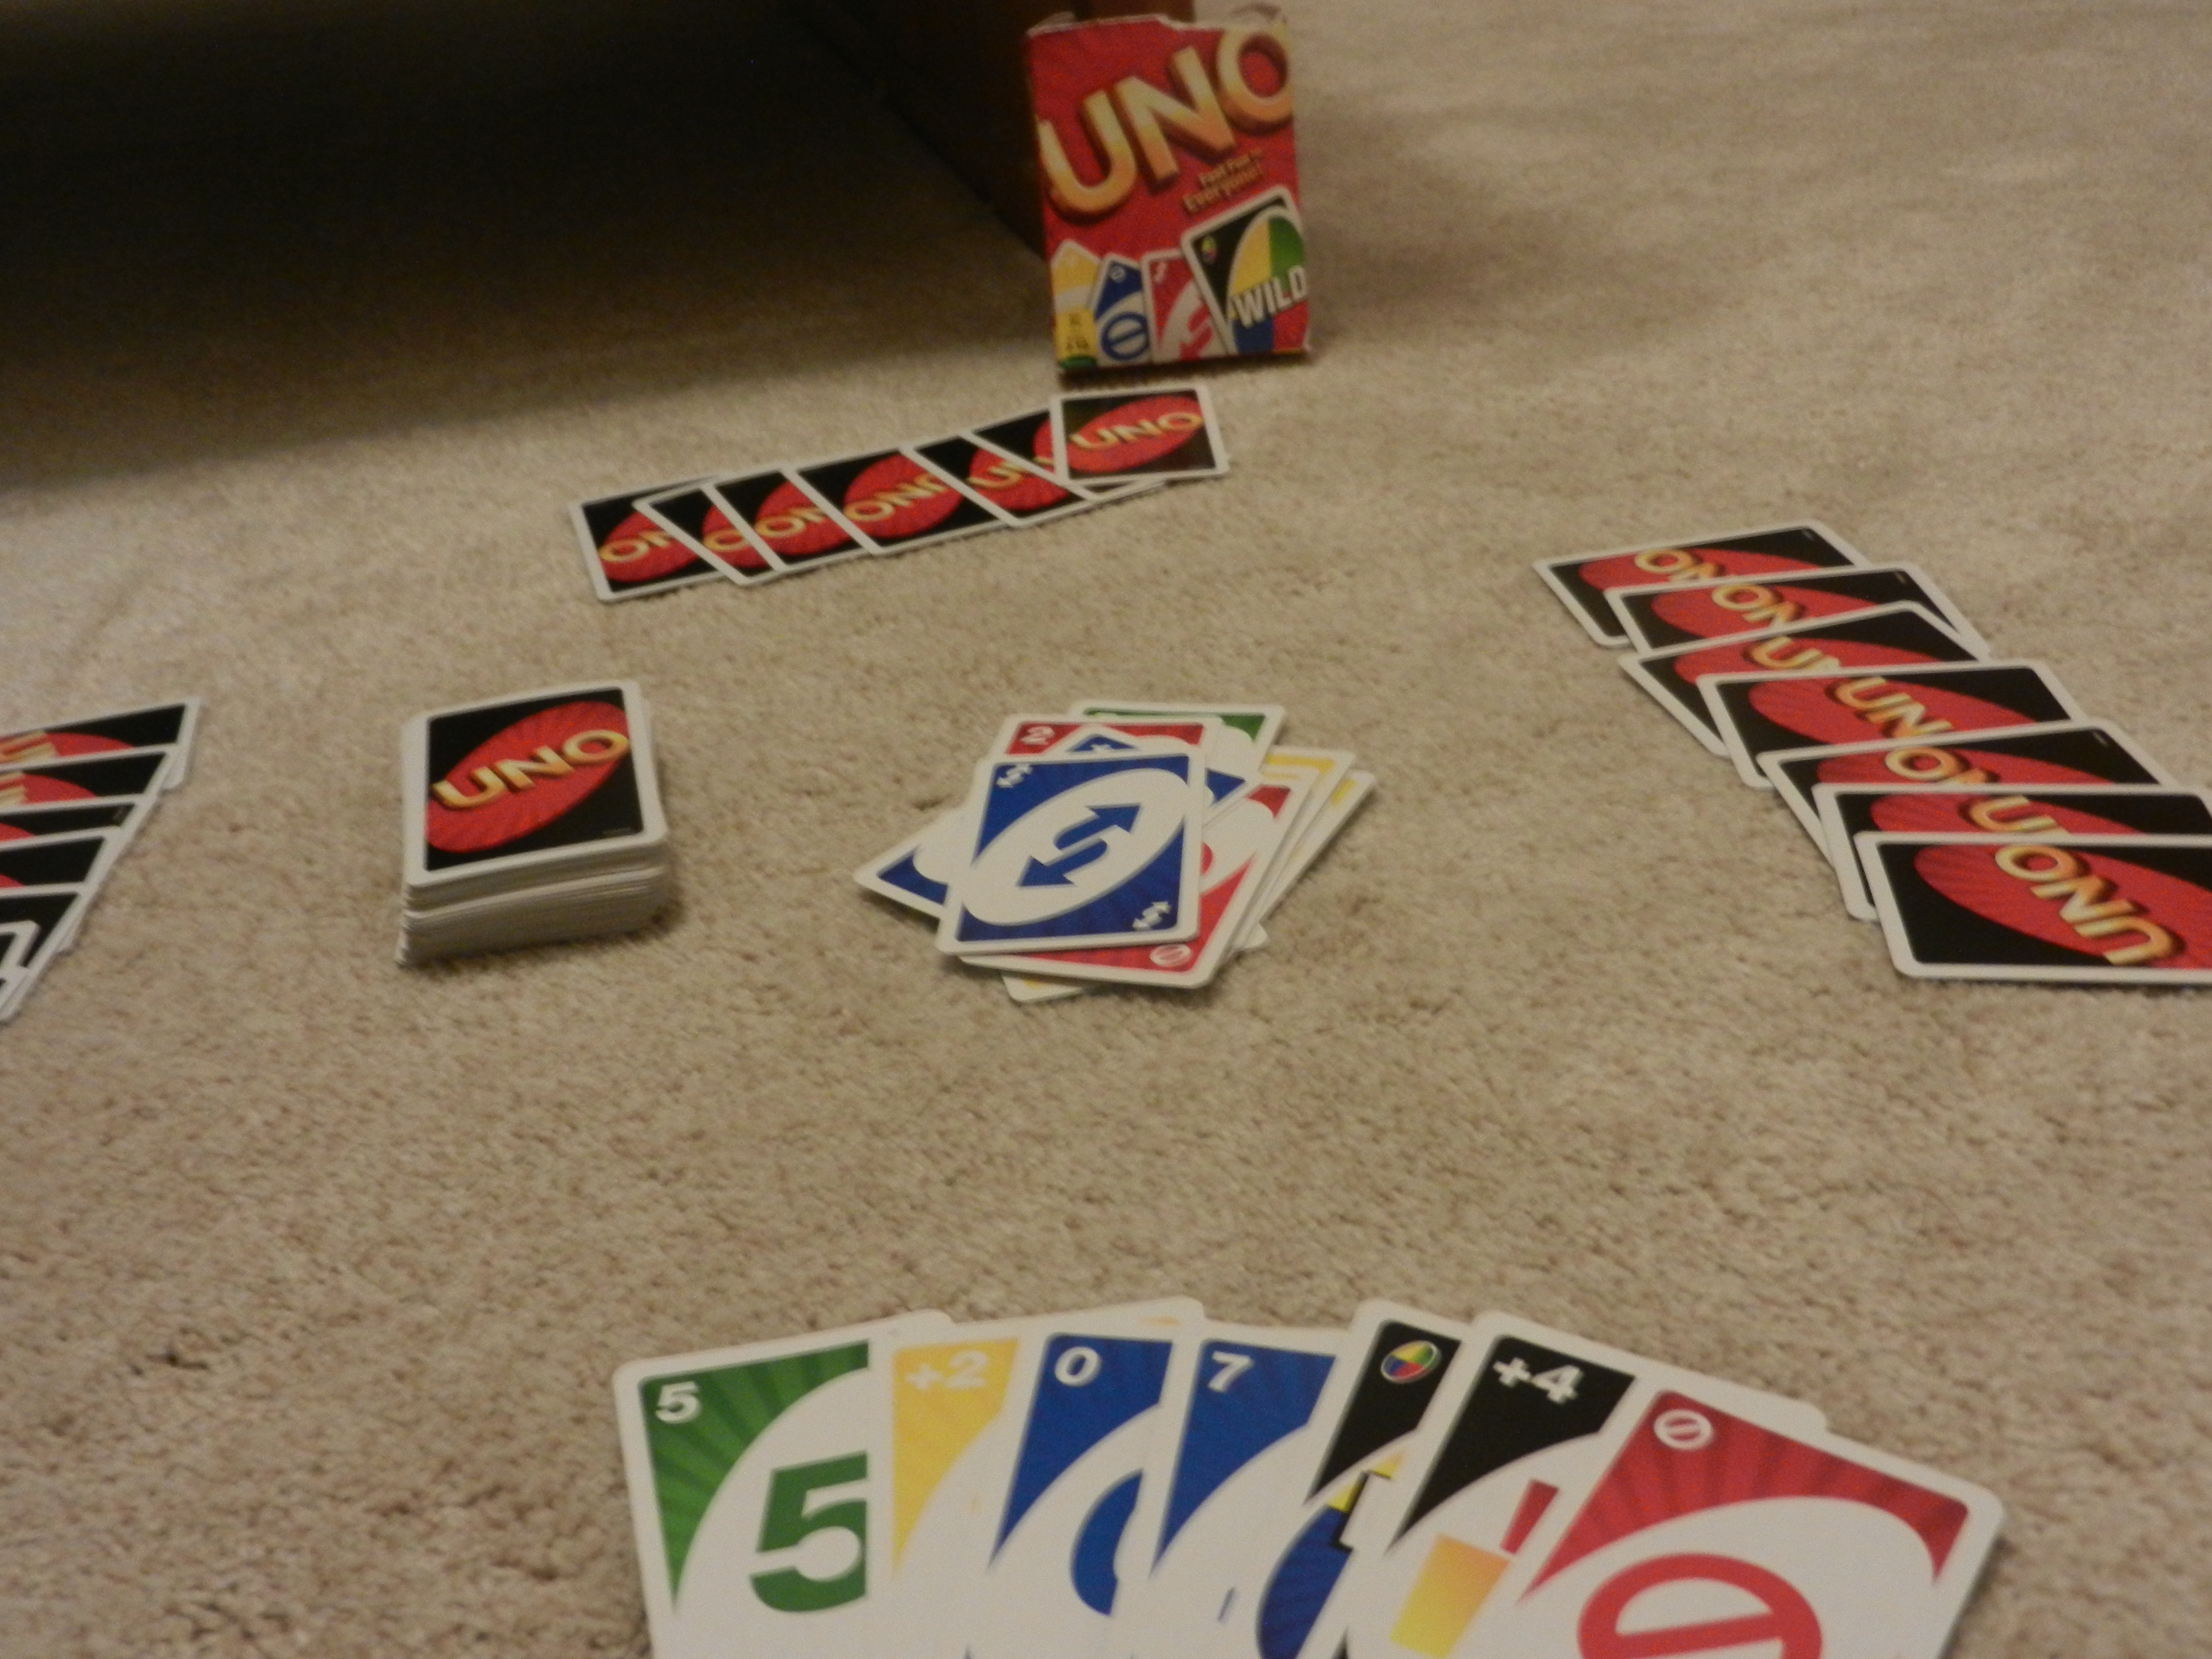 Uno game layout spread out ready to play.